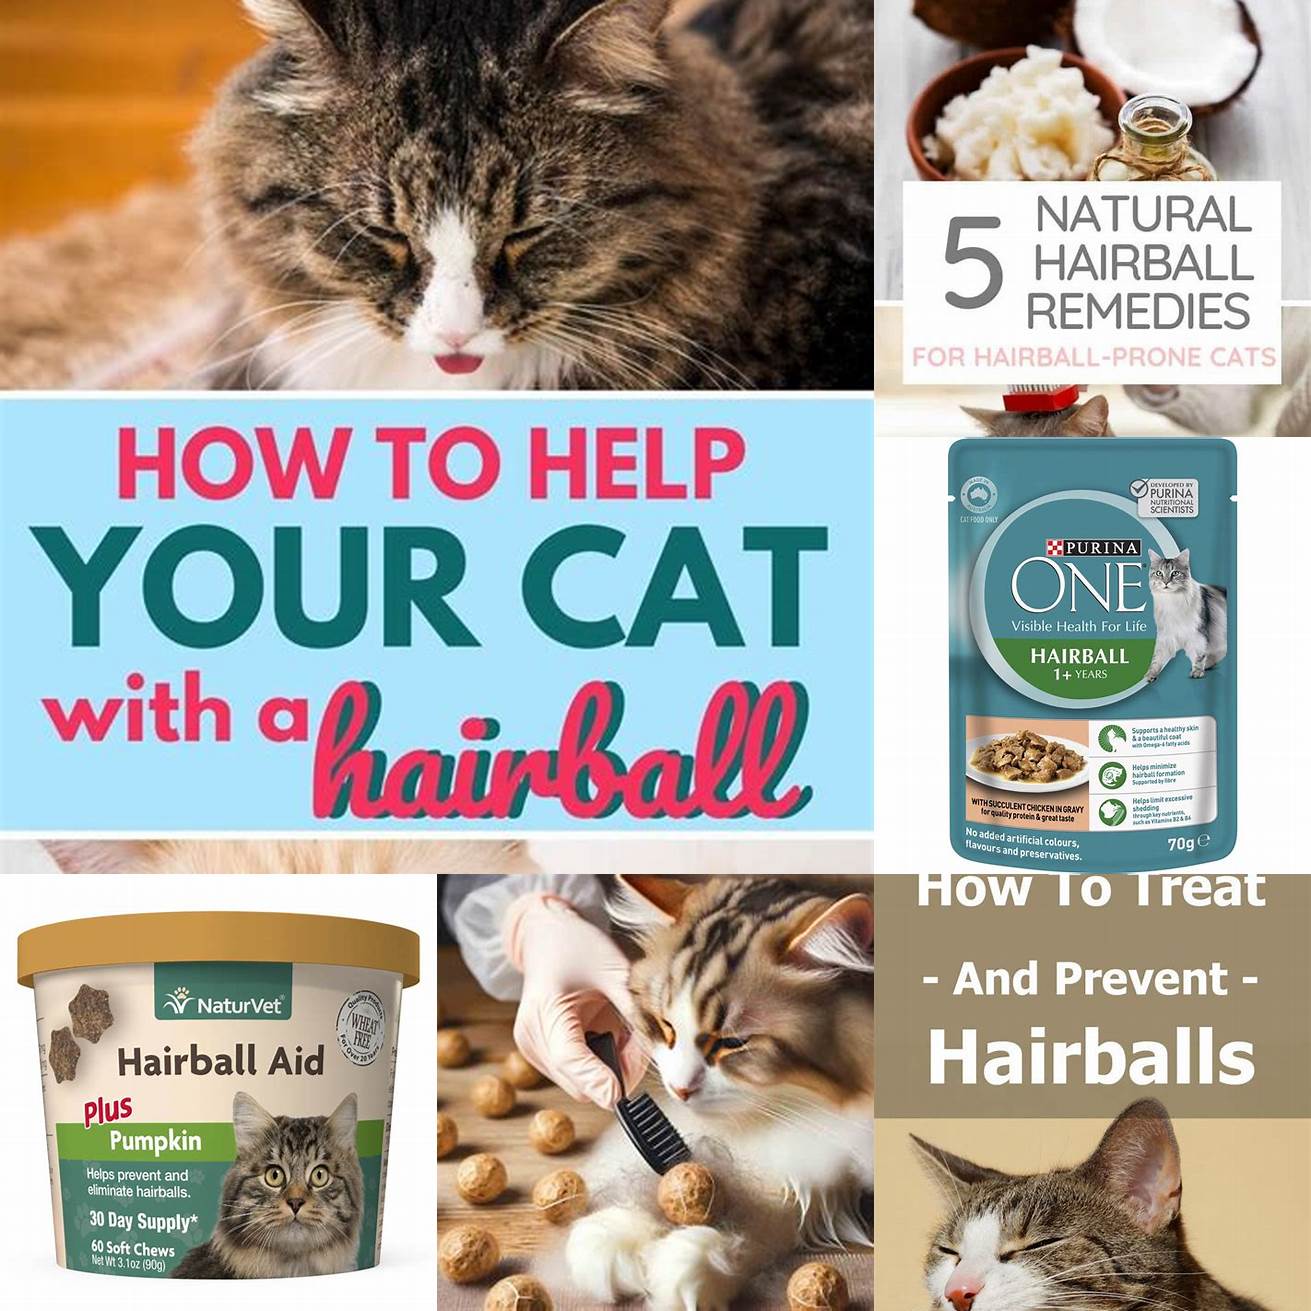 Q Can cabbage be used to treat hairballs in cats A While cabbage may help prevent hairballs in cats there is no scientific evidence to support this claim Its best to speak with your veterinarian about safe and effective ways to manage hairballs in cats